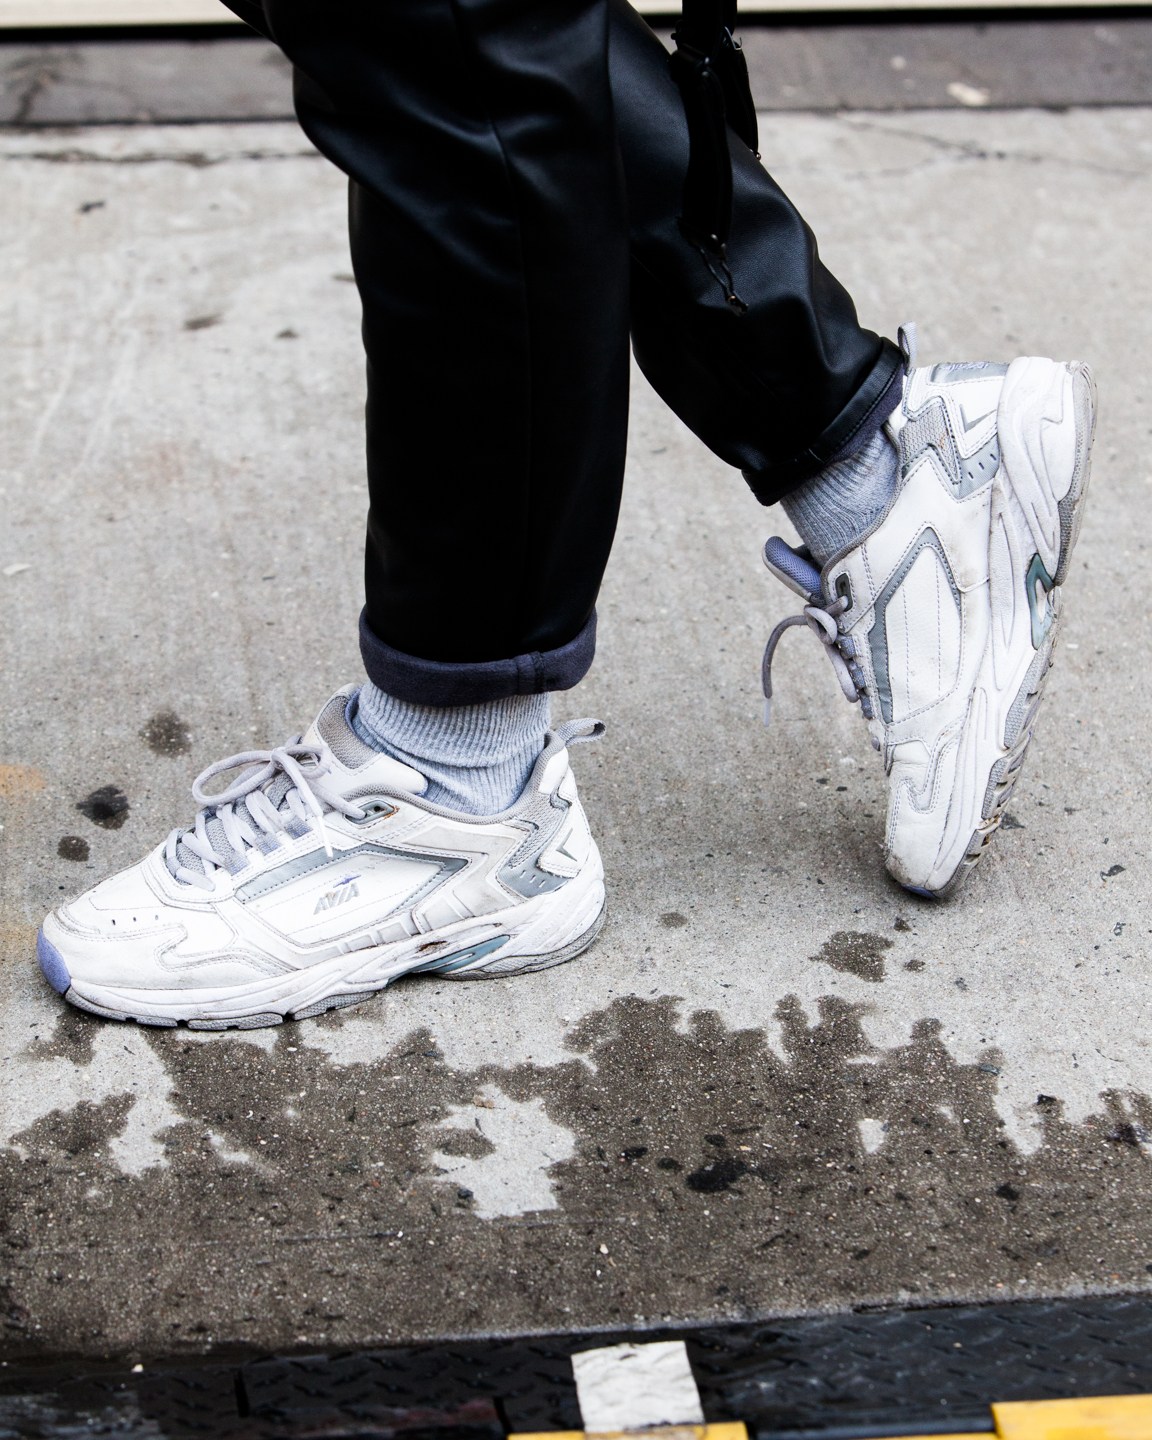 The 27 Strongest Street Style Looks From Men’s Fashion Week